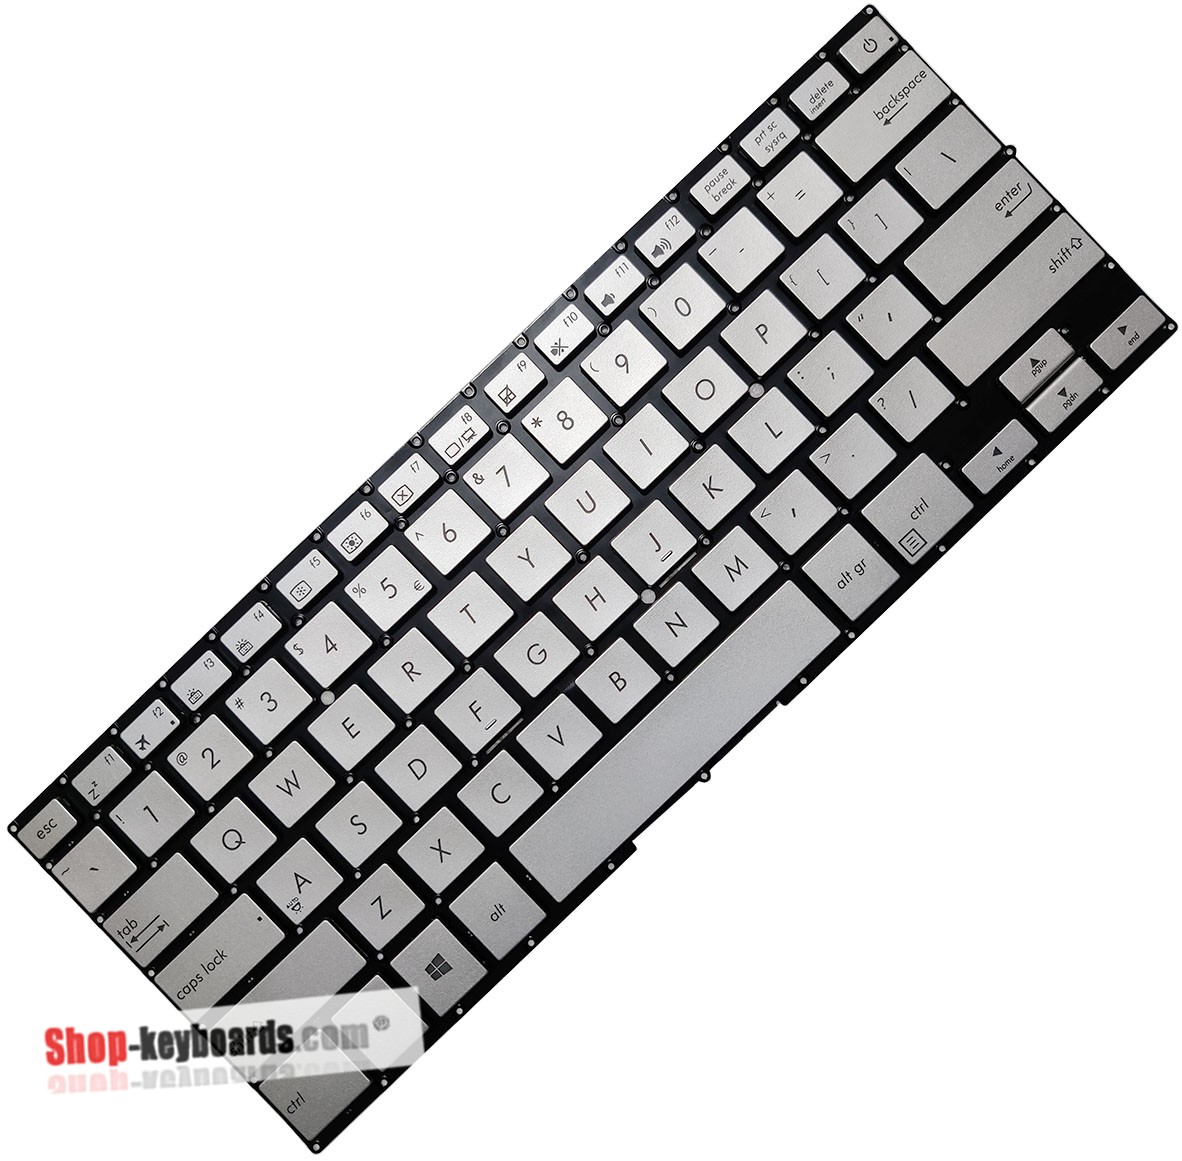 Asus 0KNB0-D620JP00 Keyboard replacement